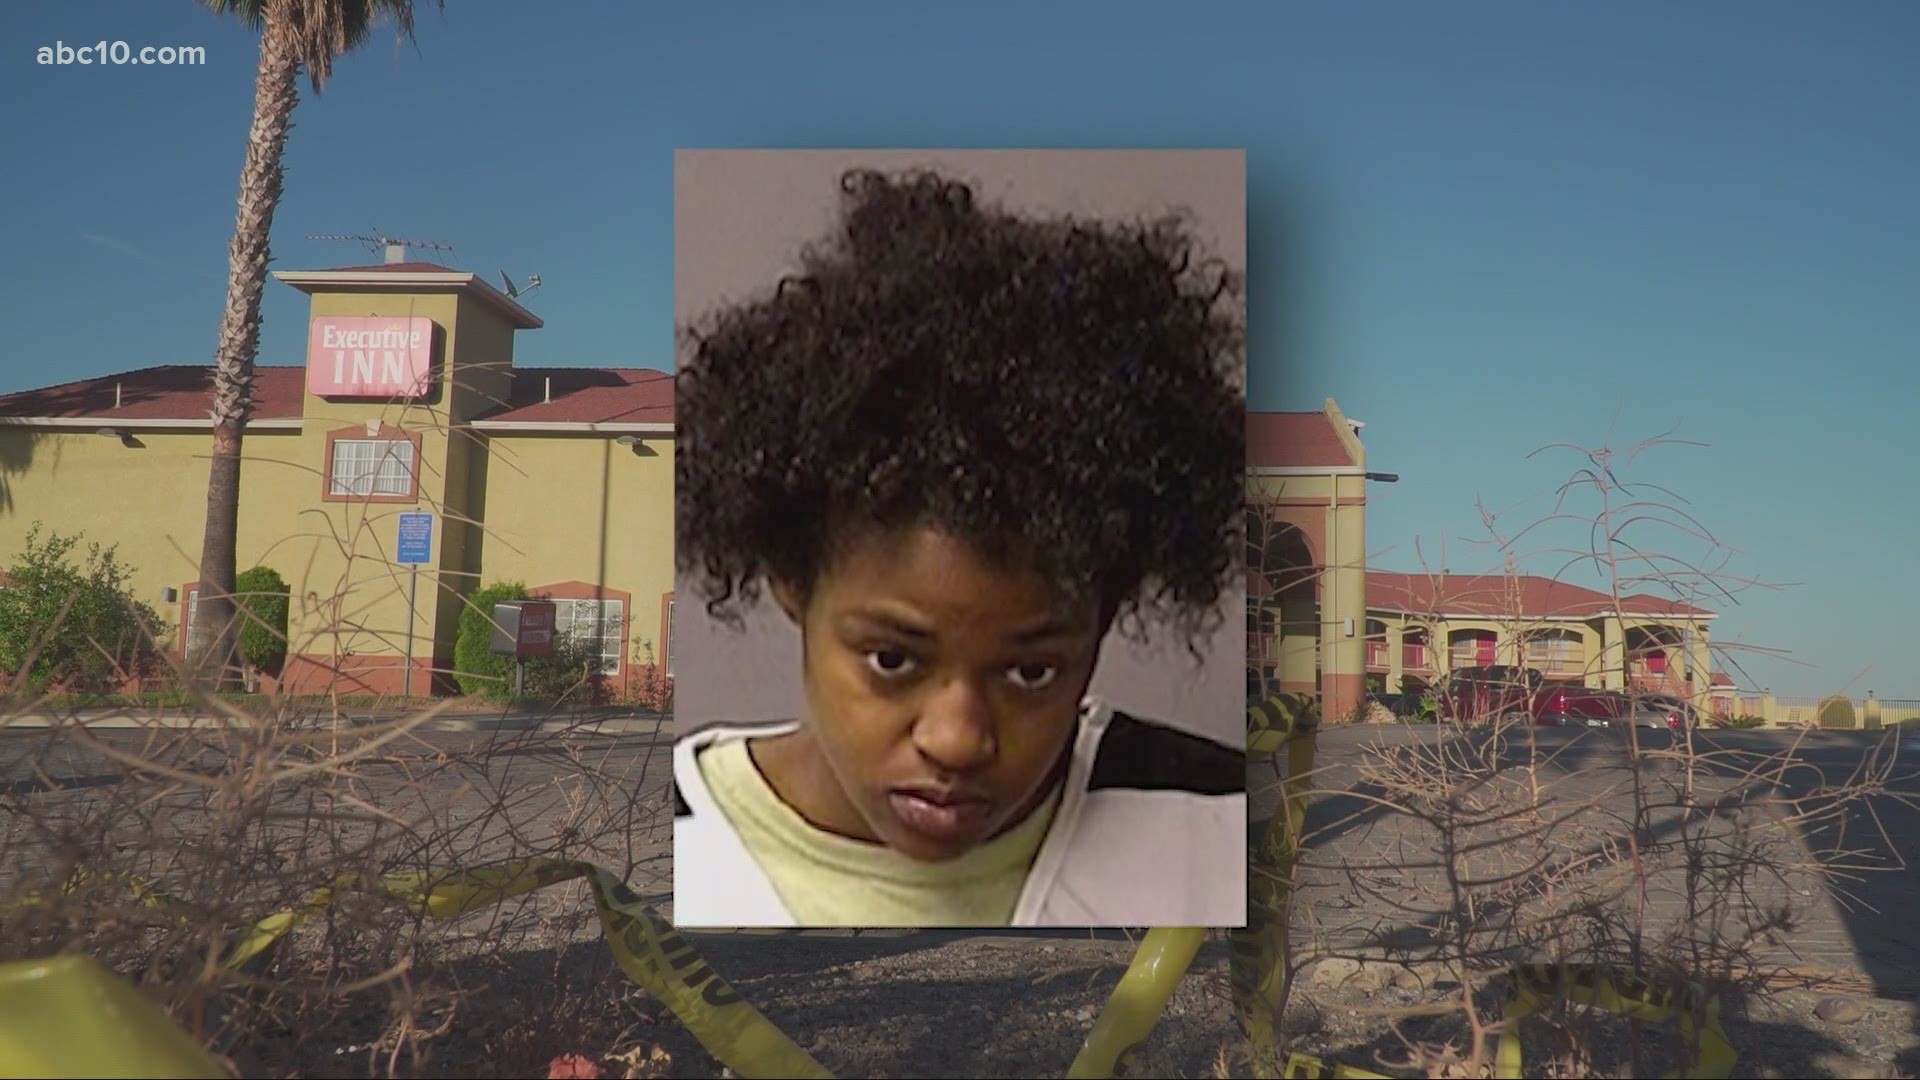 The Stanislaus County Sheriff’s Office arrested Tierra Davis, 18, in connection to the shooting.